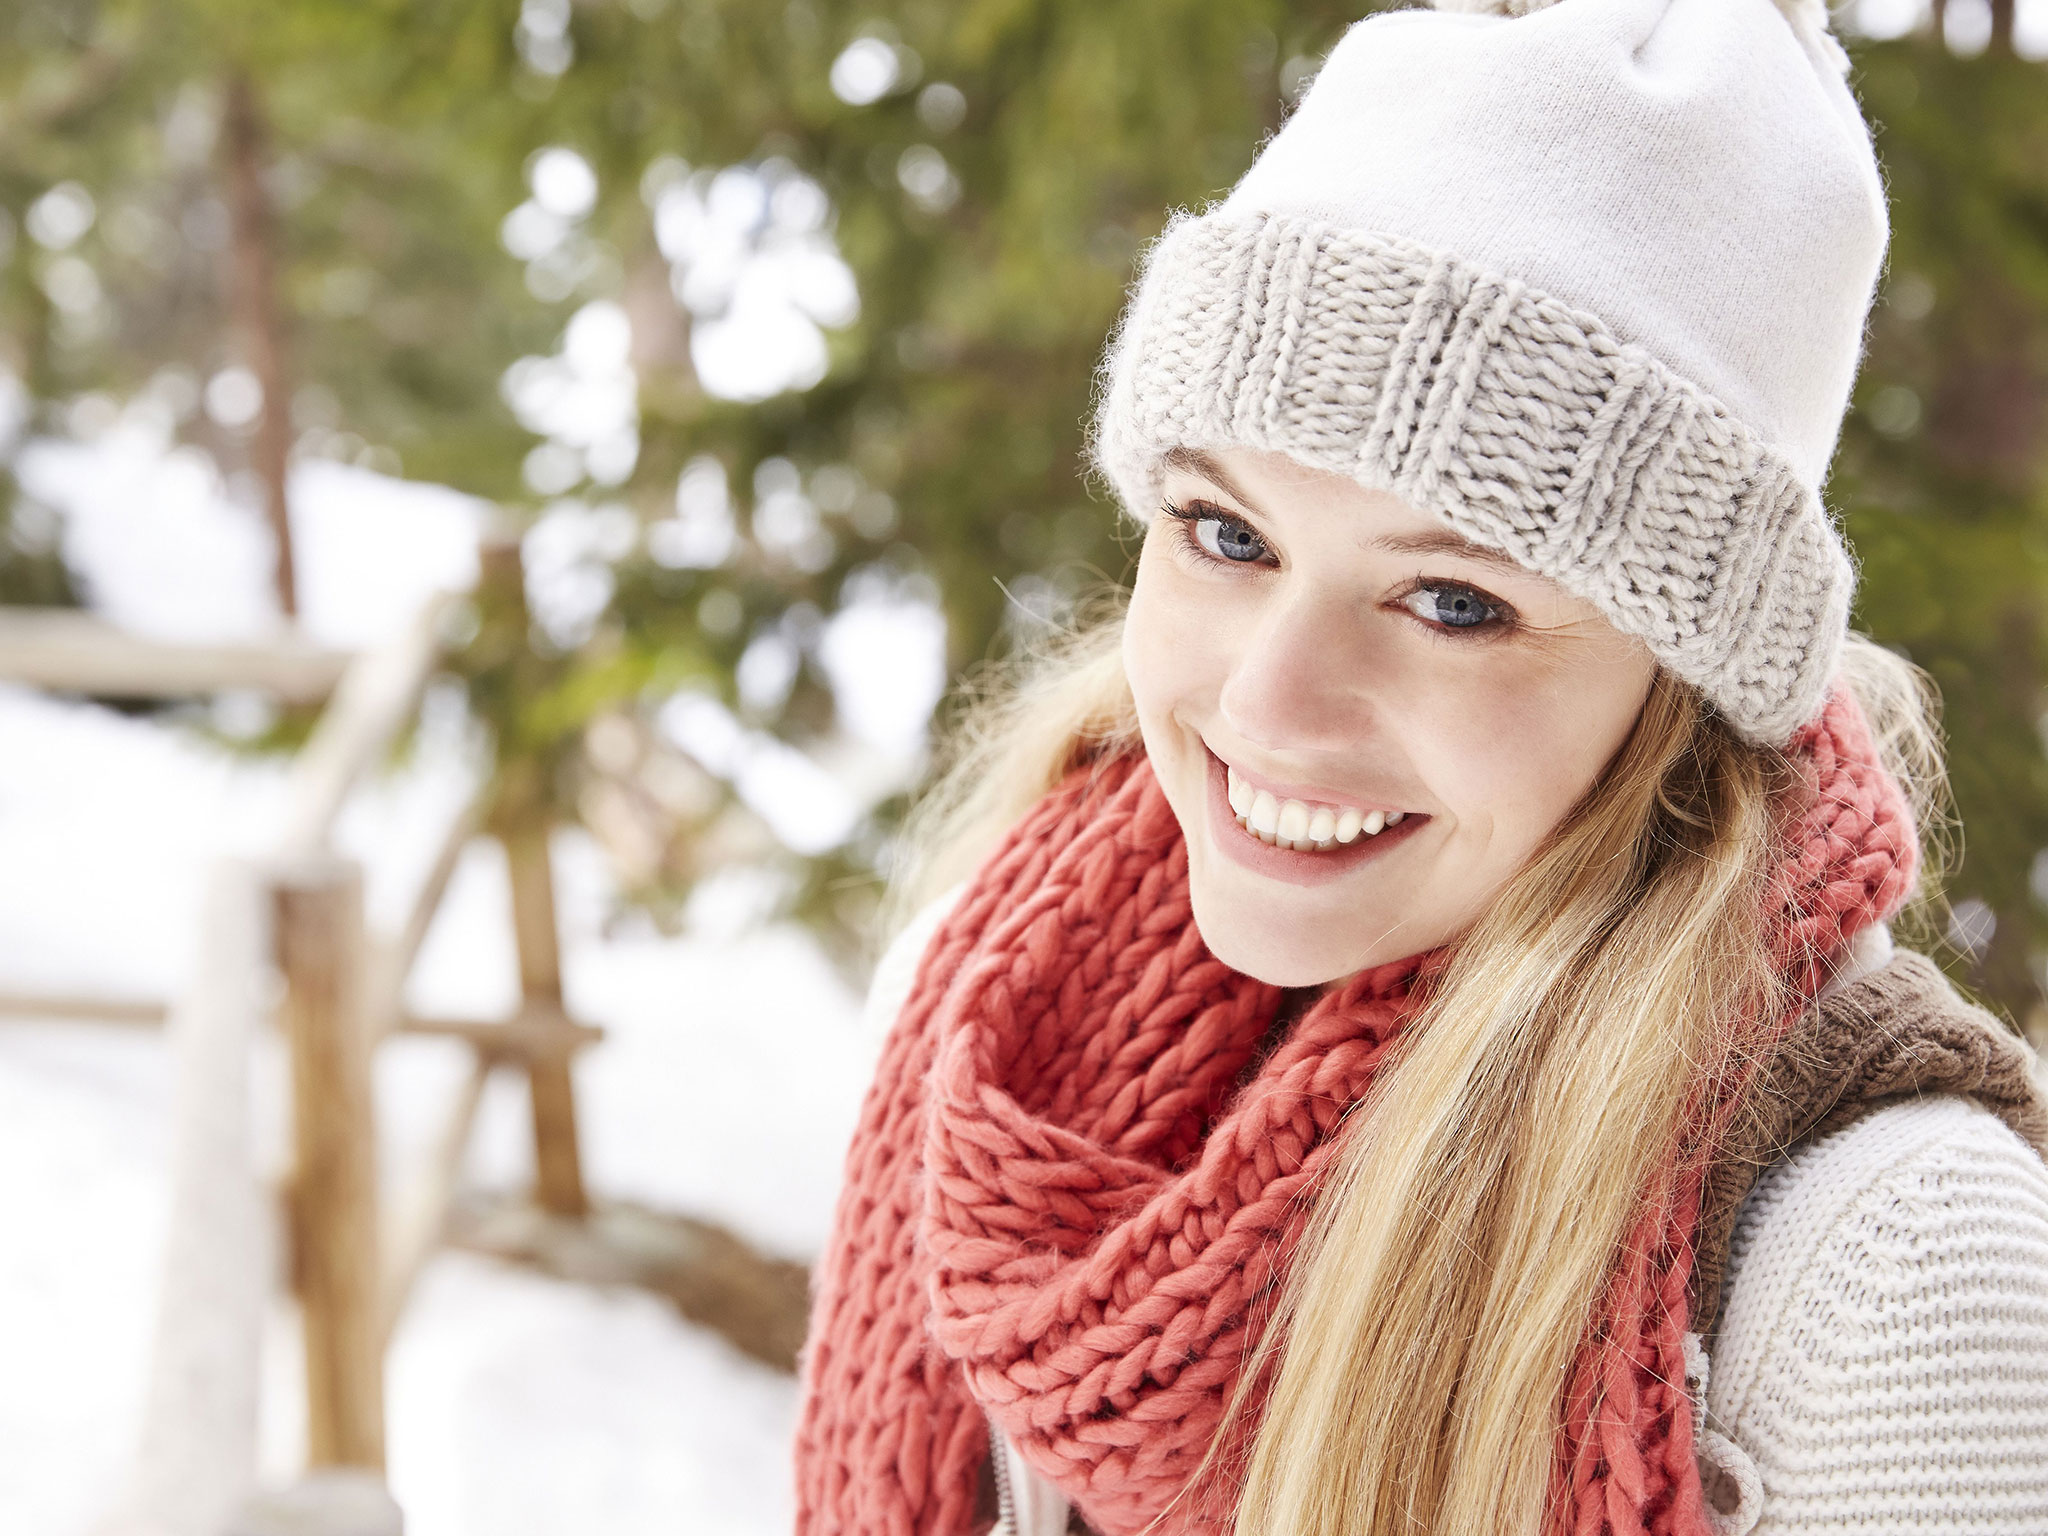 7 Important Winter Skin Care Tips For All Skin Types